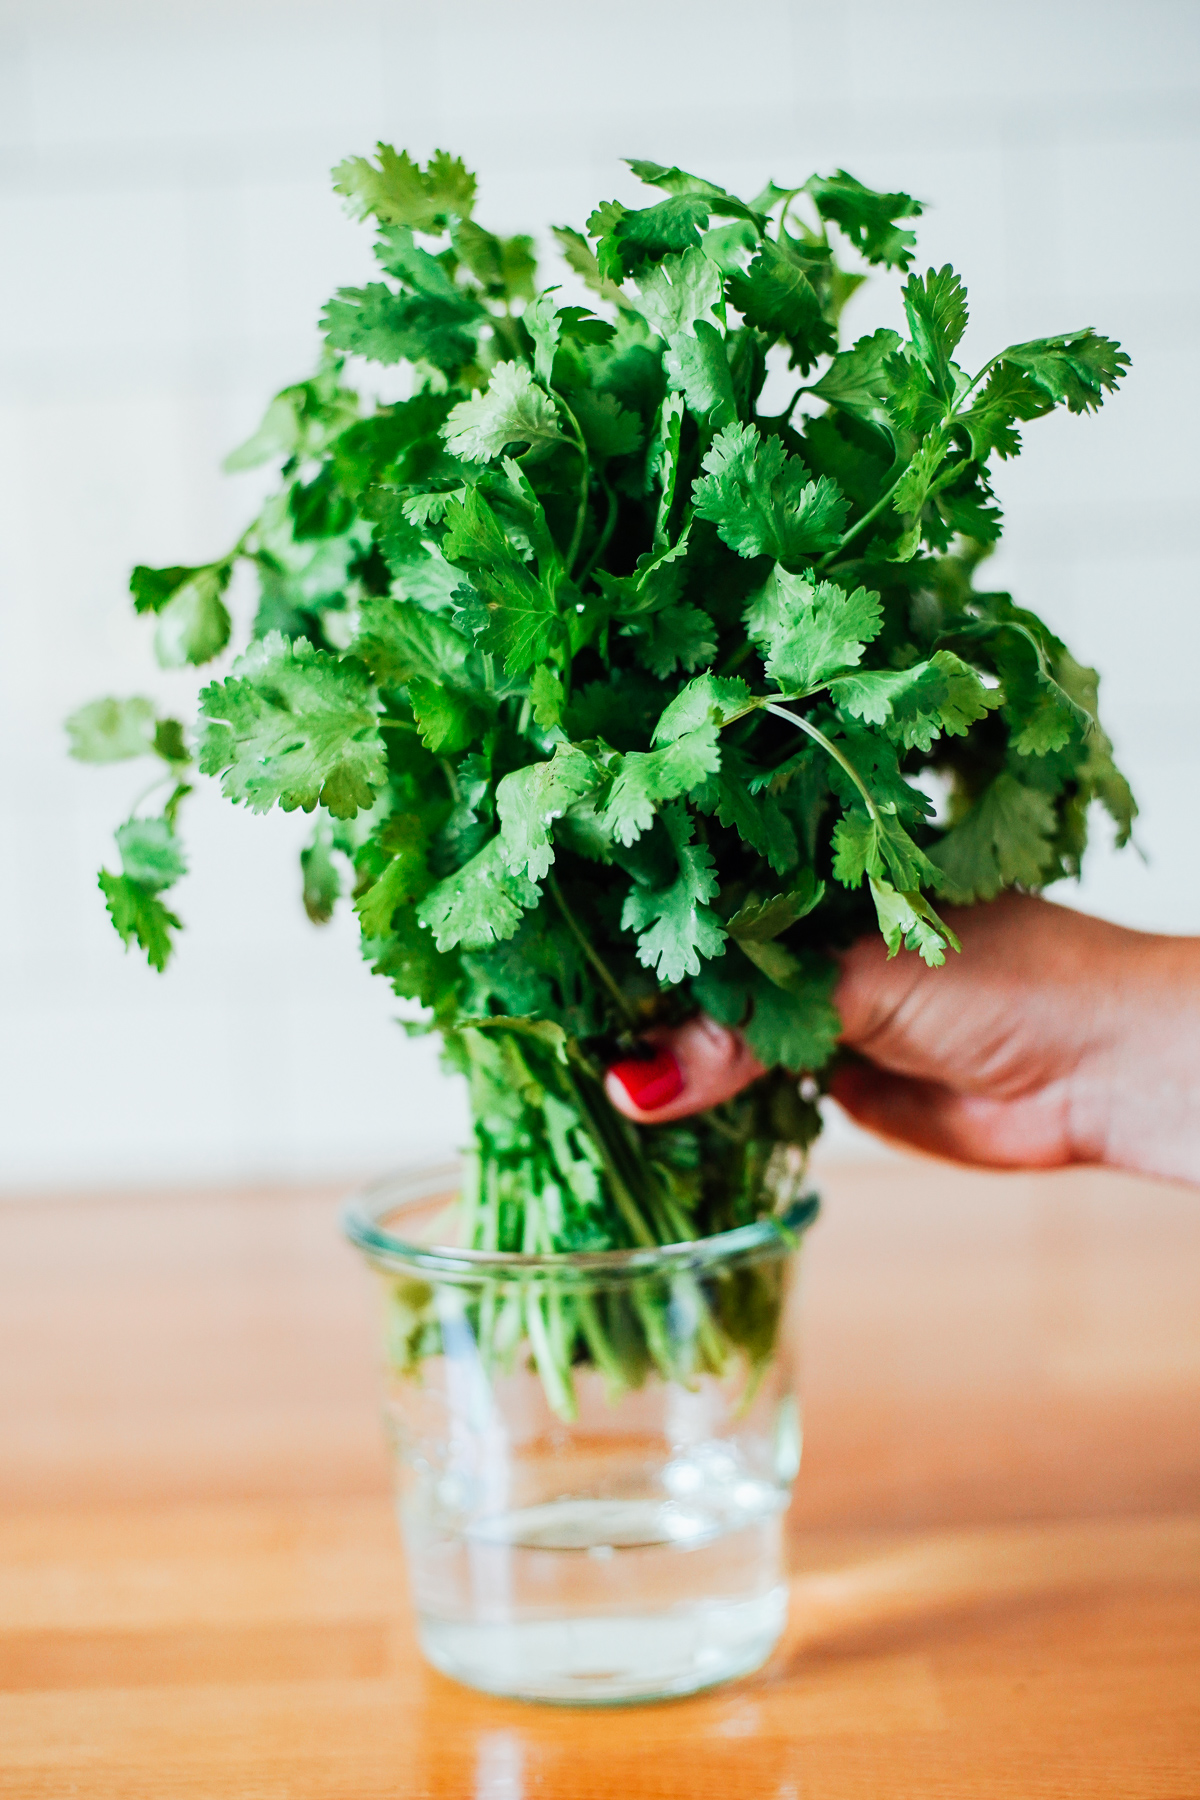 Placing cilantro in a glass of water, filled with 1 inch of fresh water.